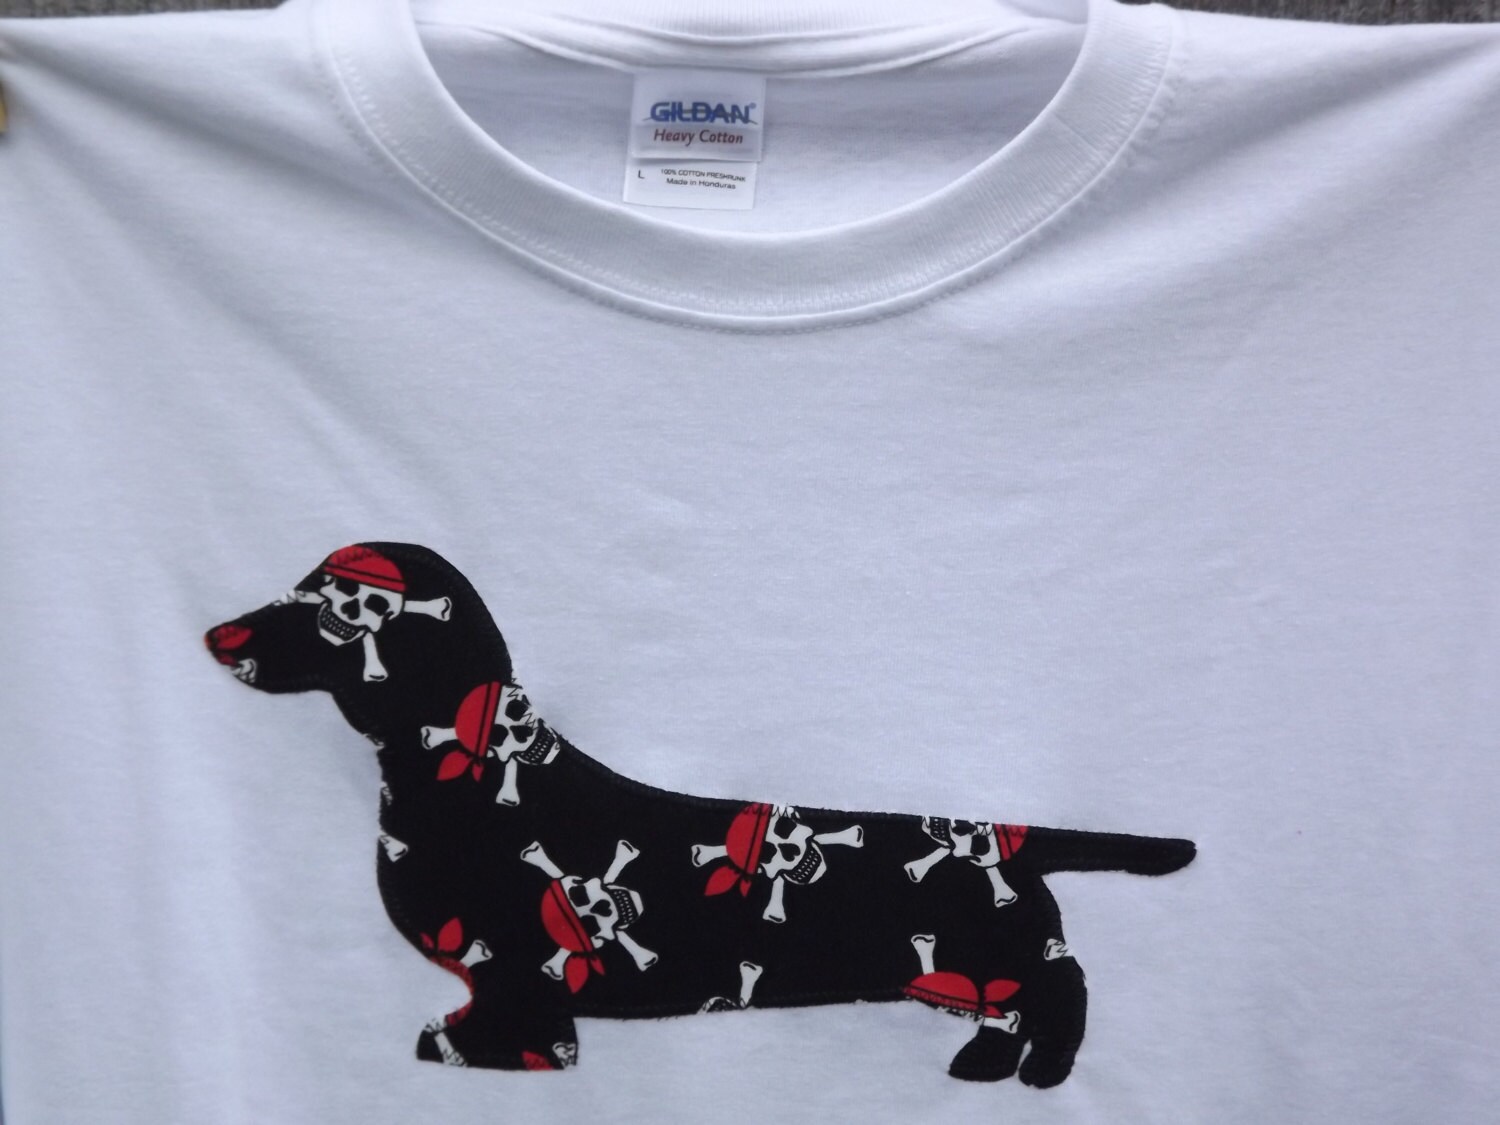 Dachshund Shirt Adult Large CLEARANCE by ParadiseStitches